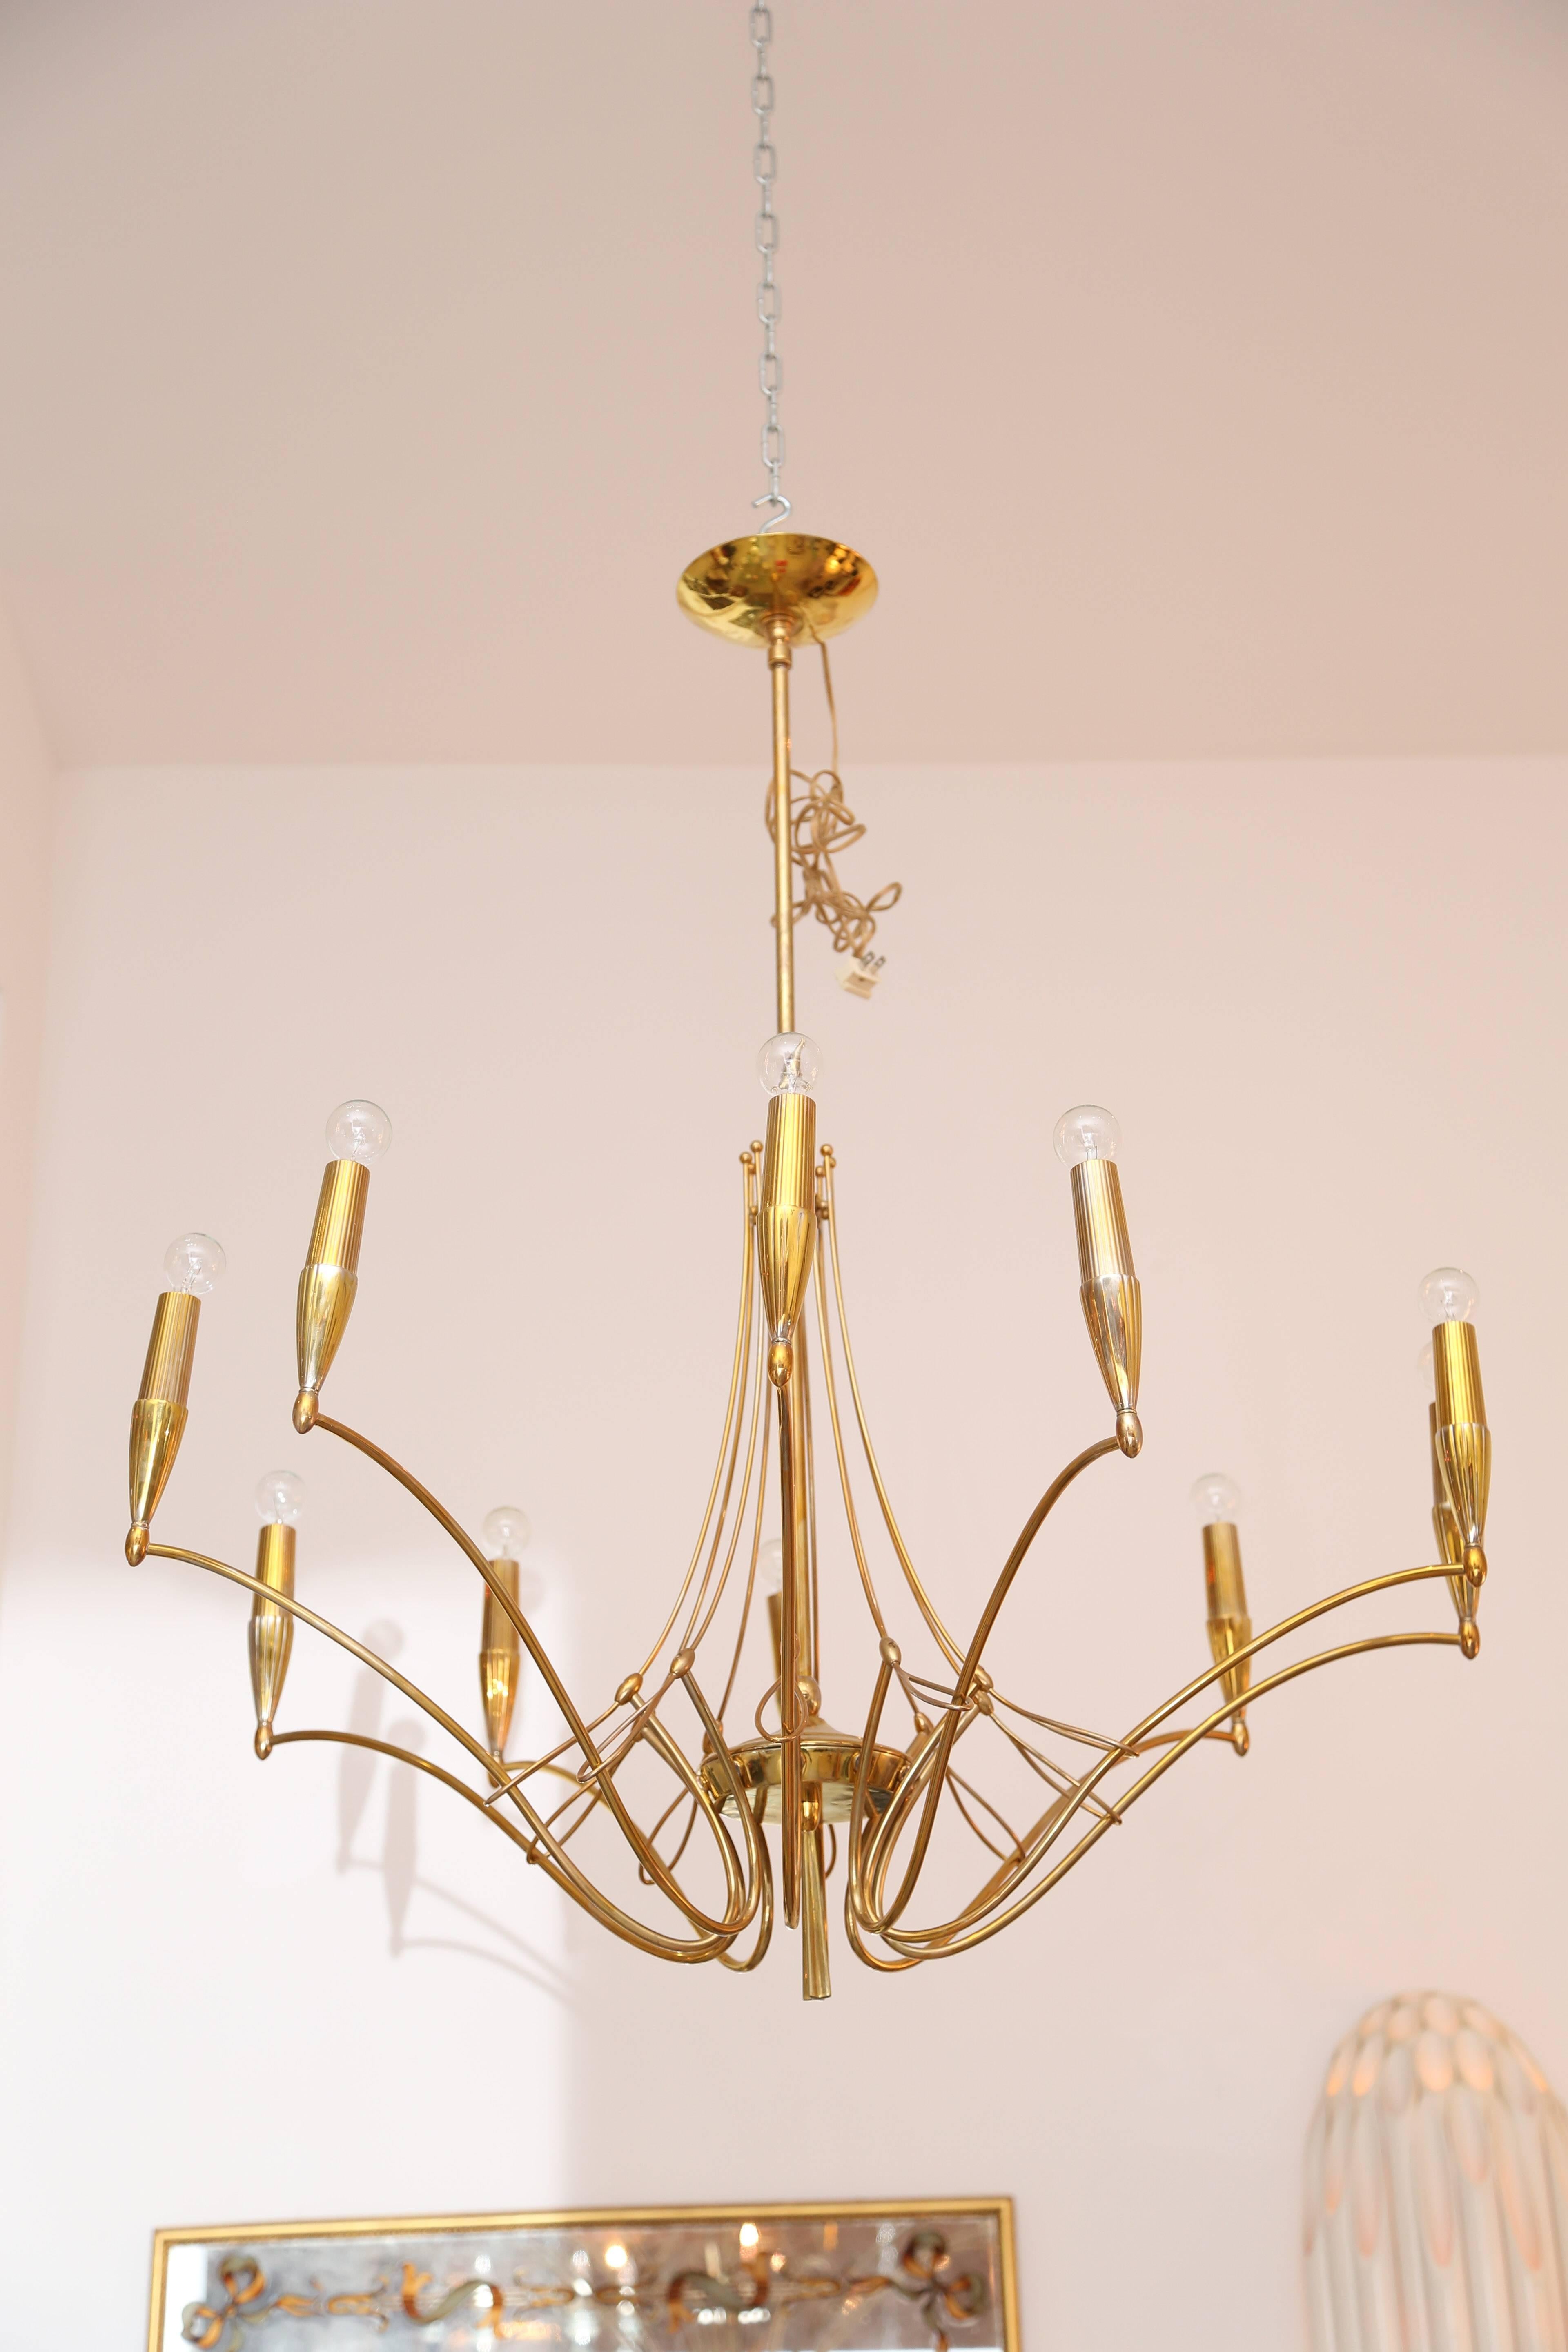 Ten-arm brass chandelier with ten sockets that house candelabra size bulbs.
The fixture has been rewired for US standards.